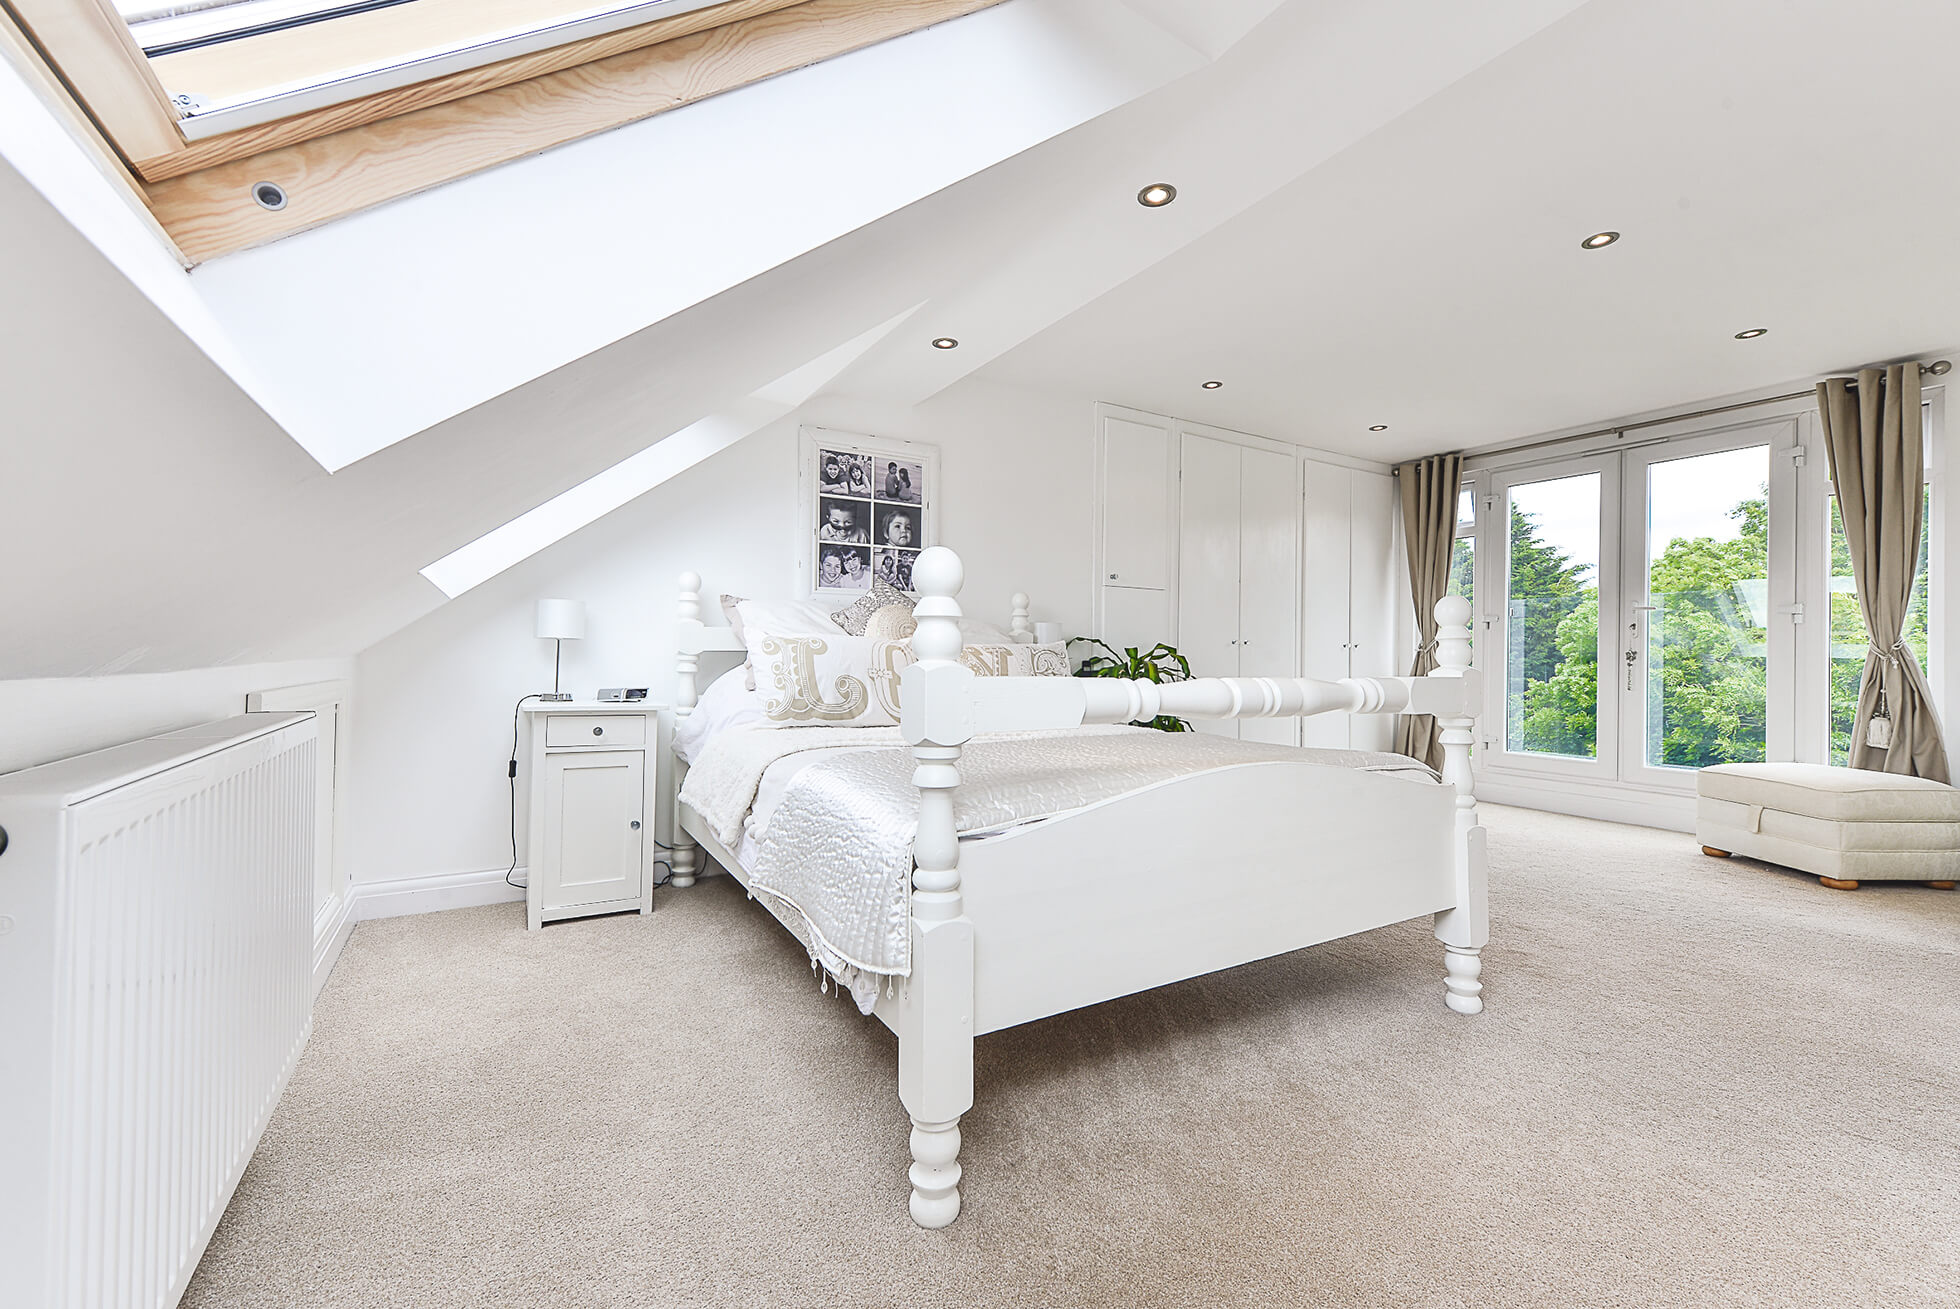 Do you have a question about converting your Loft in Baldock? Here are the most popular questions asked by our clients.